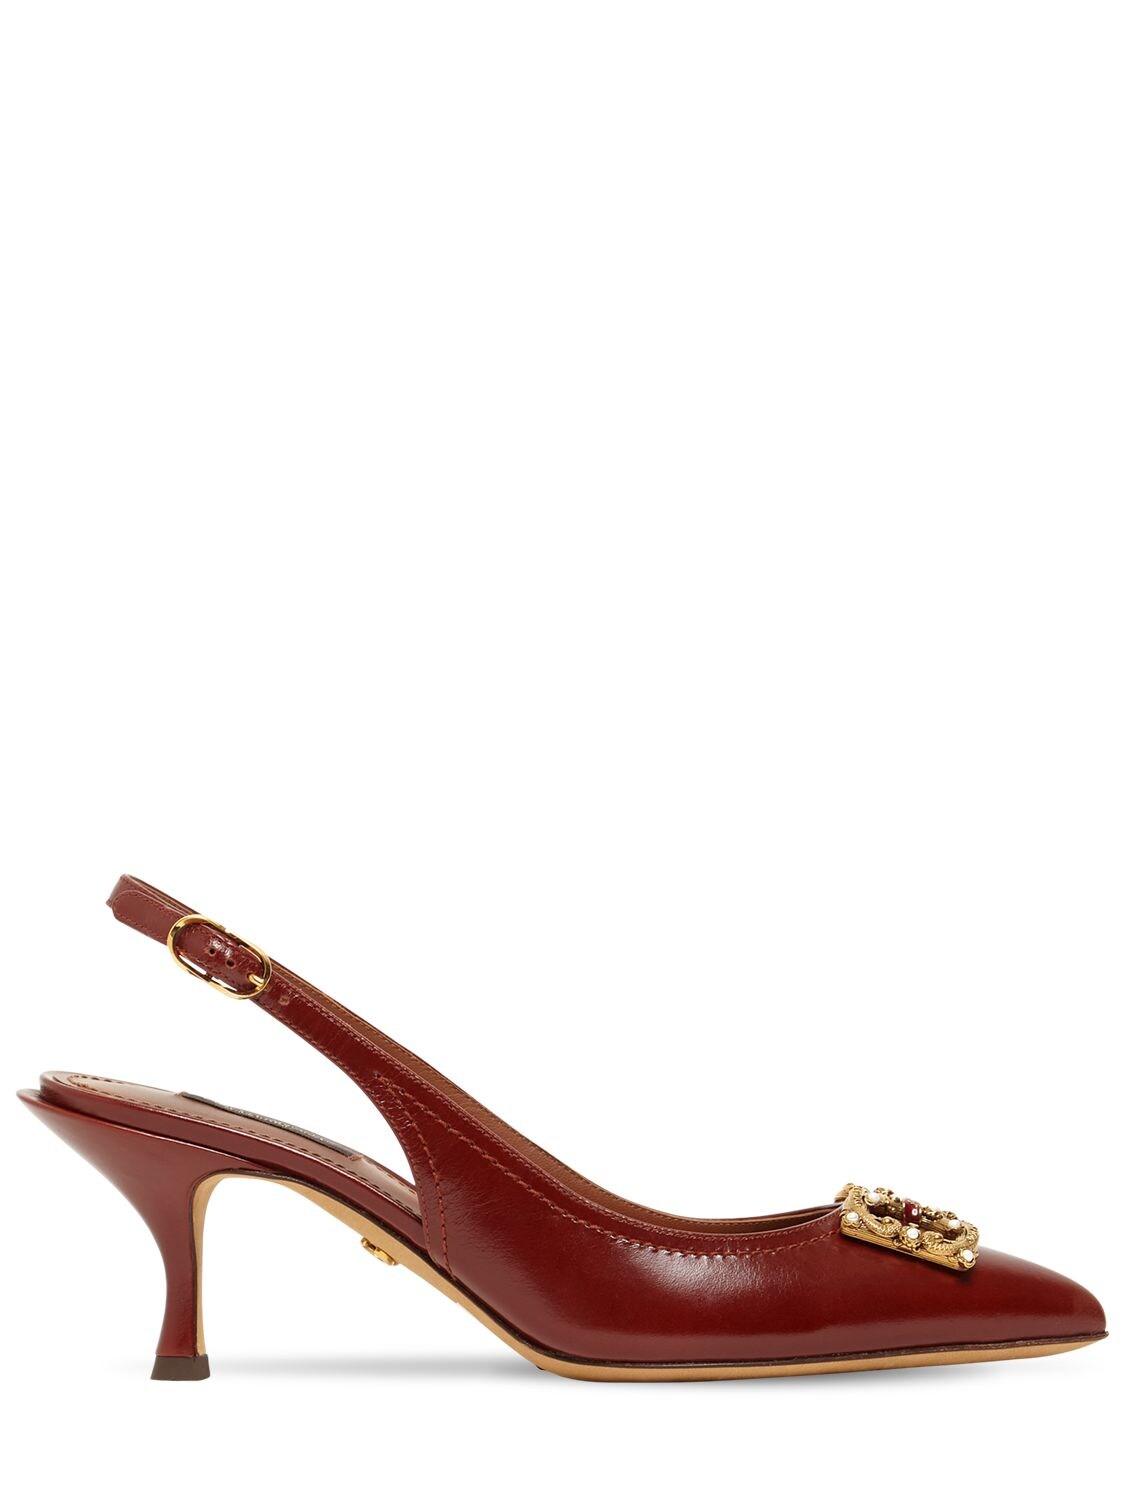 Dolce & Gabbana 60mm Leather Sling Back Pumps In Brown